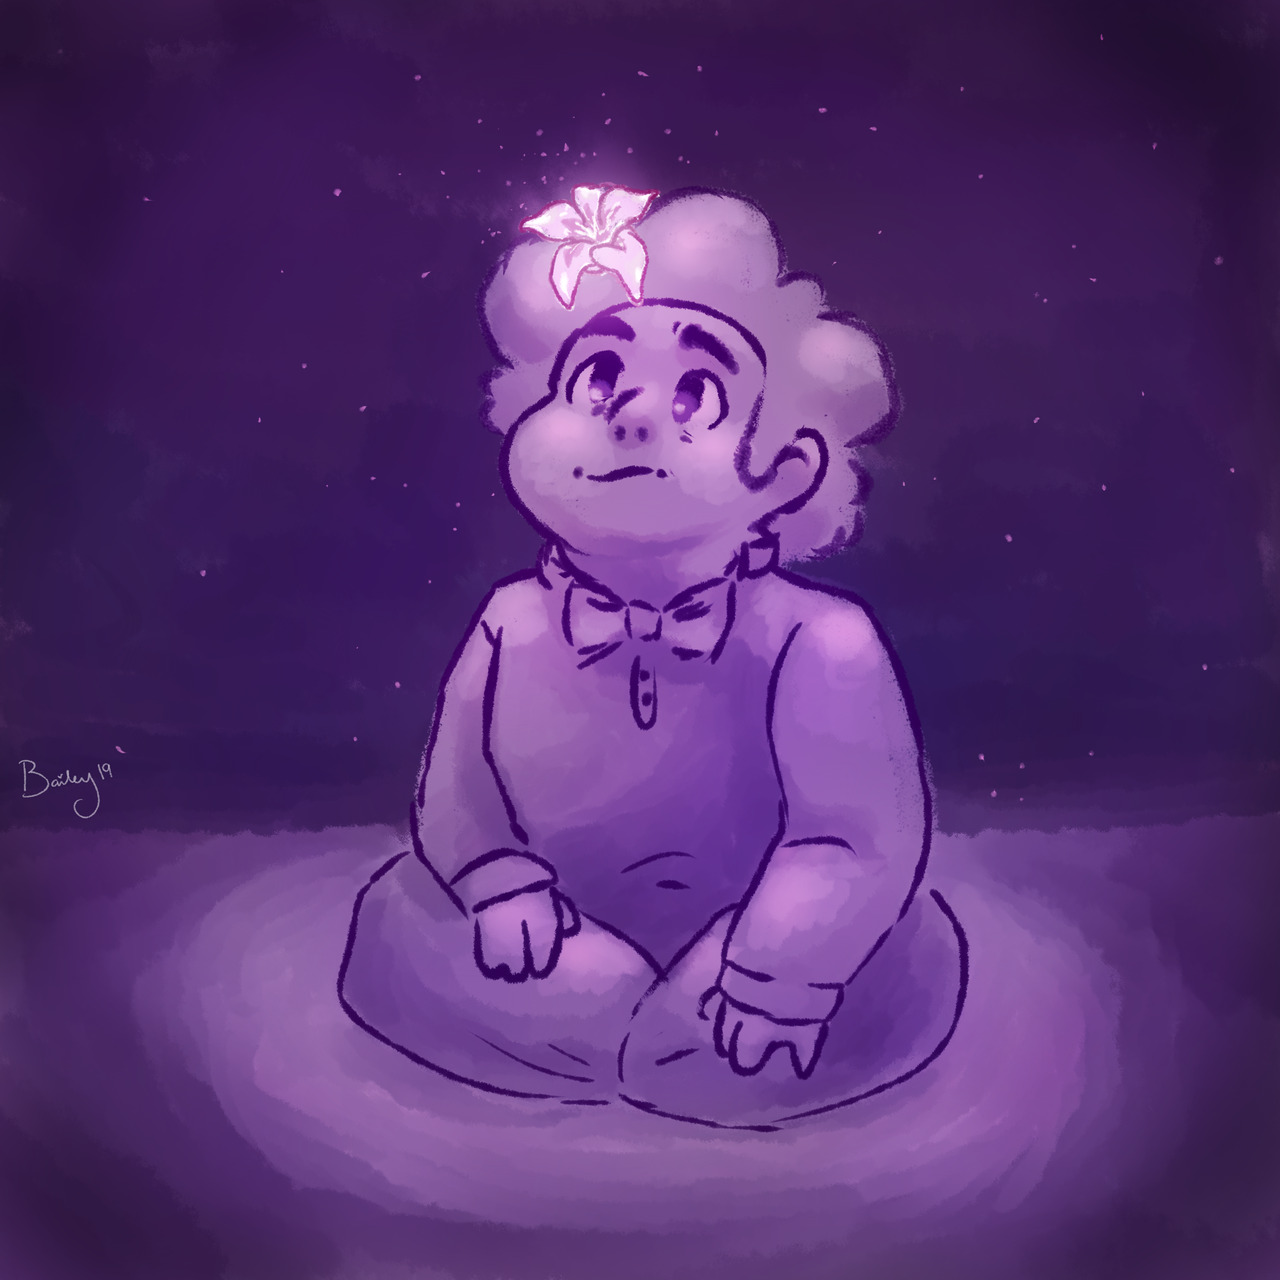 I’ve always had a head canon that Steven grows flowers in his hair when he gets nervous